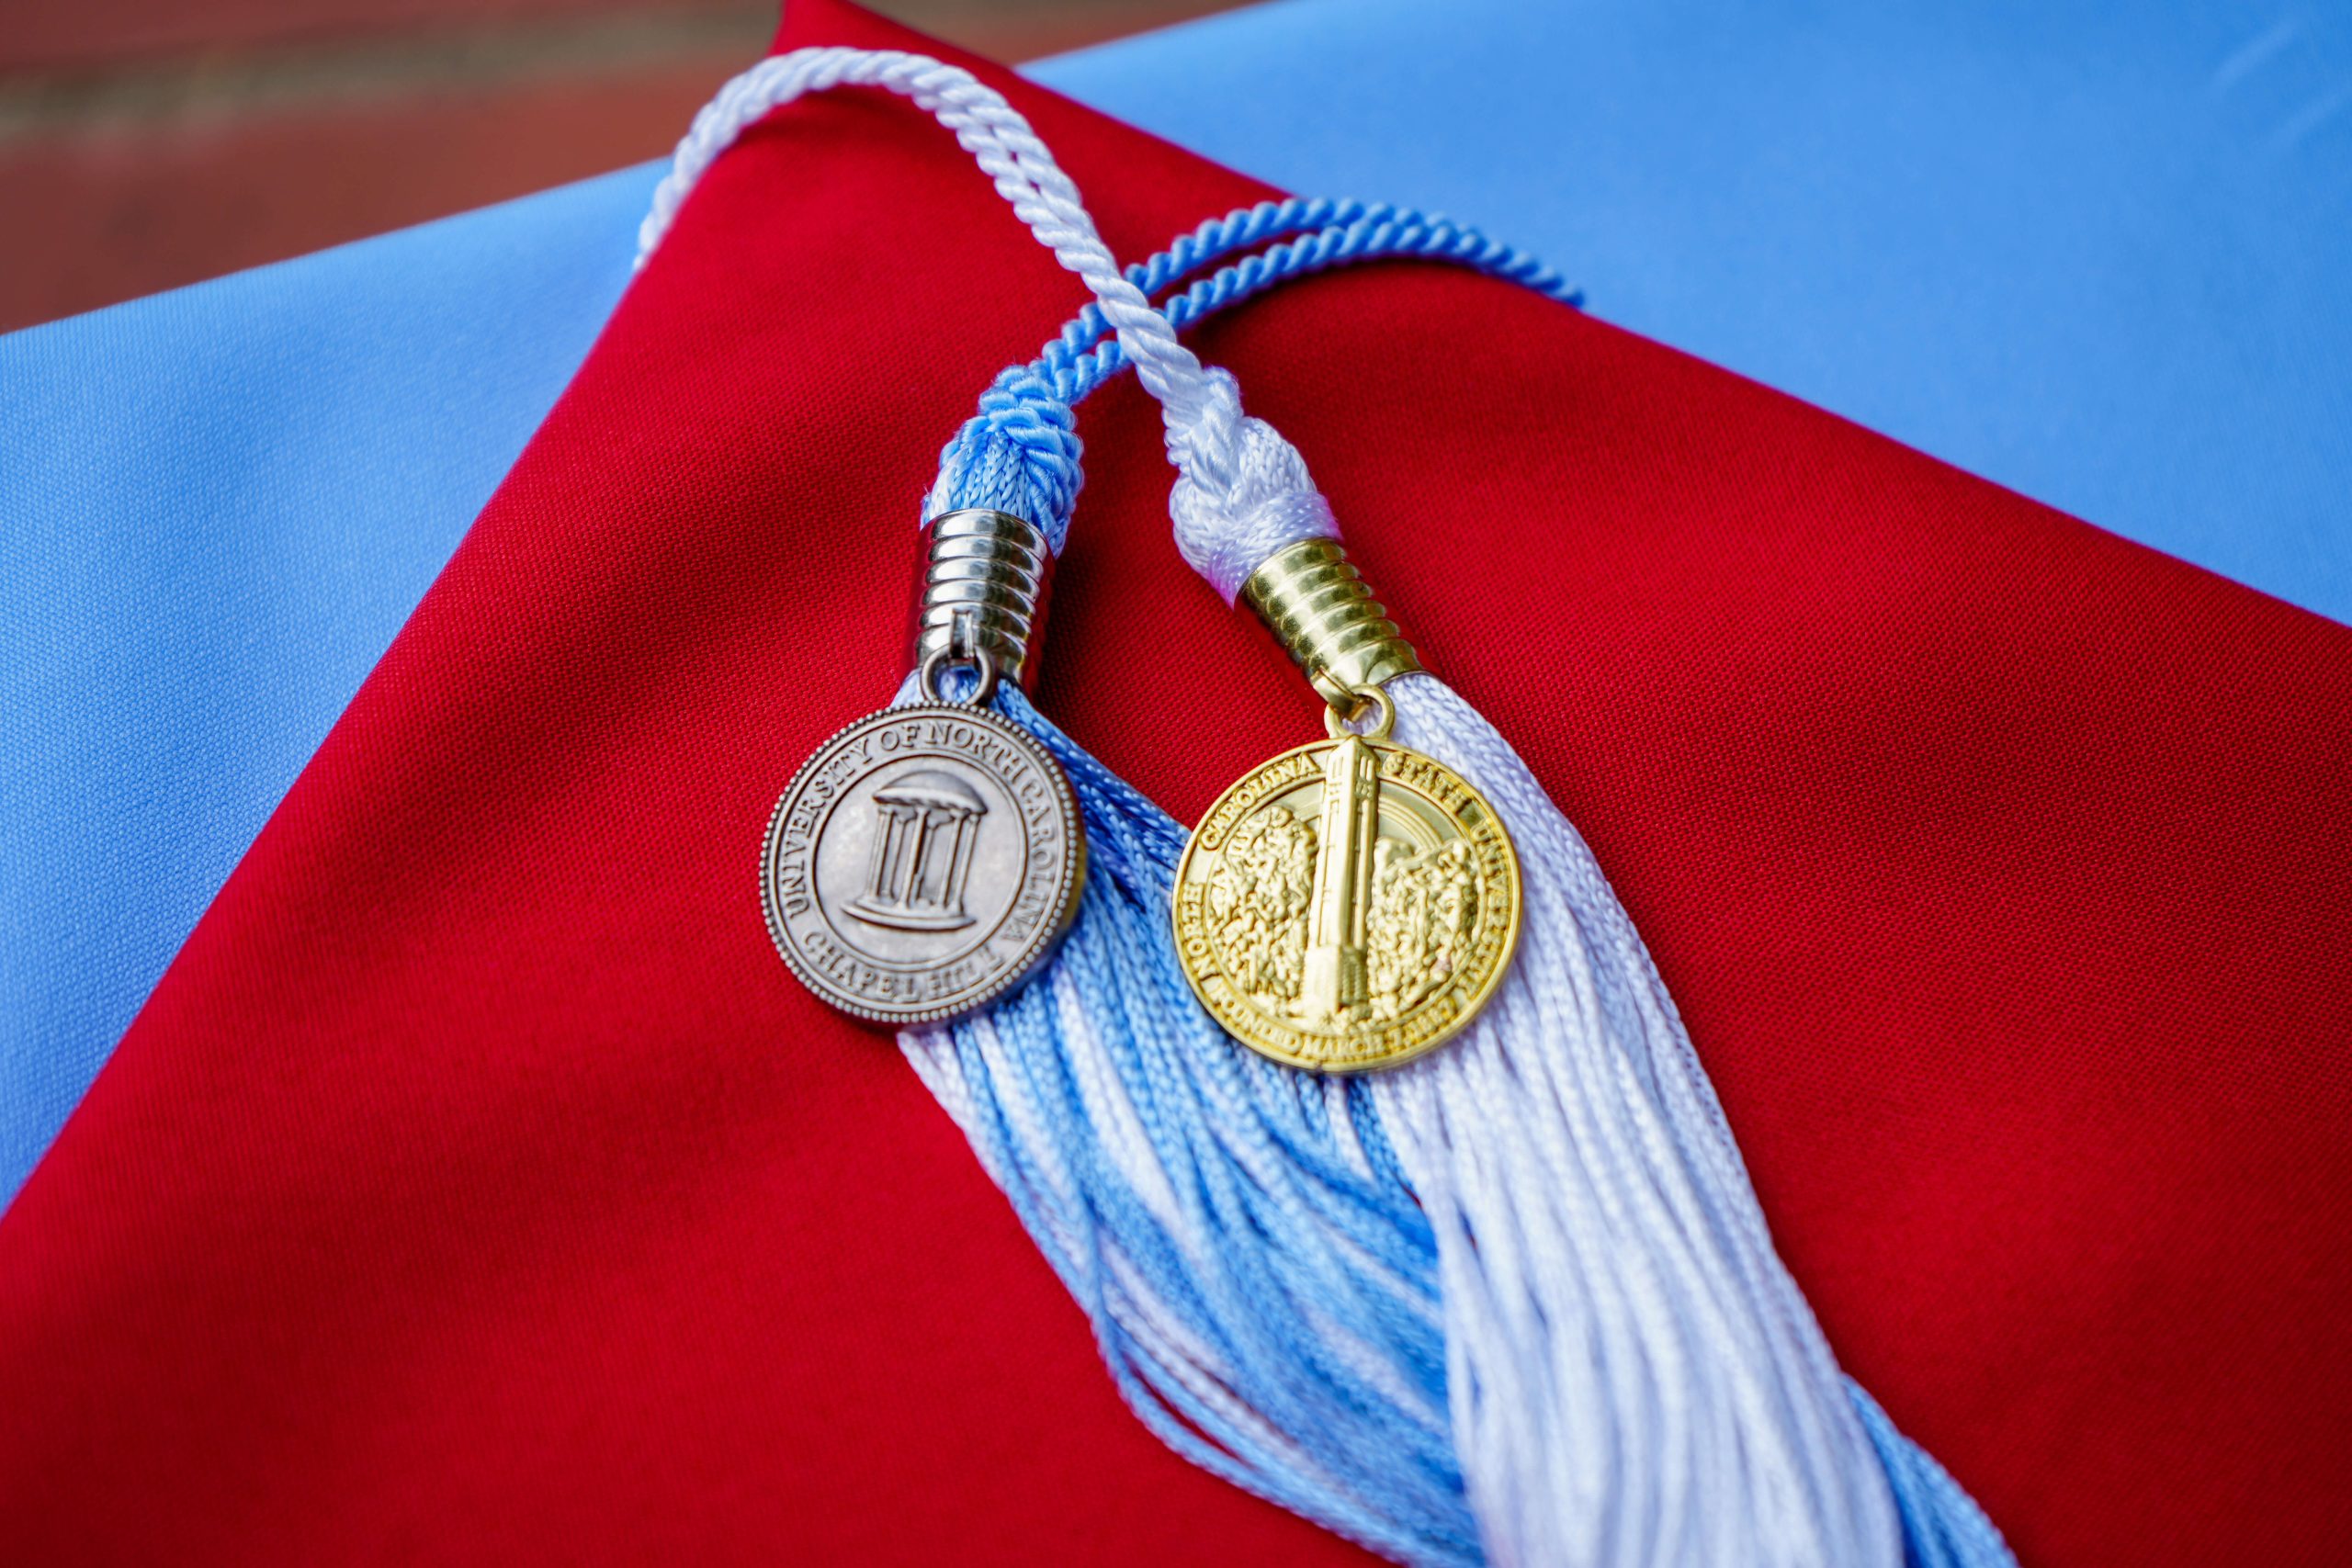 Photo of UNC and NC State Graduation Caps and Tassels